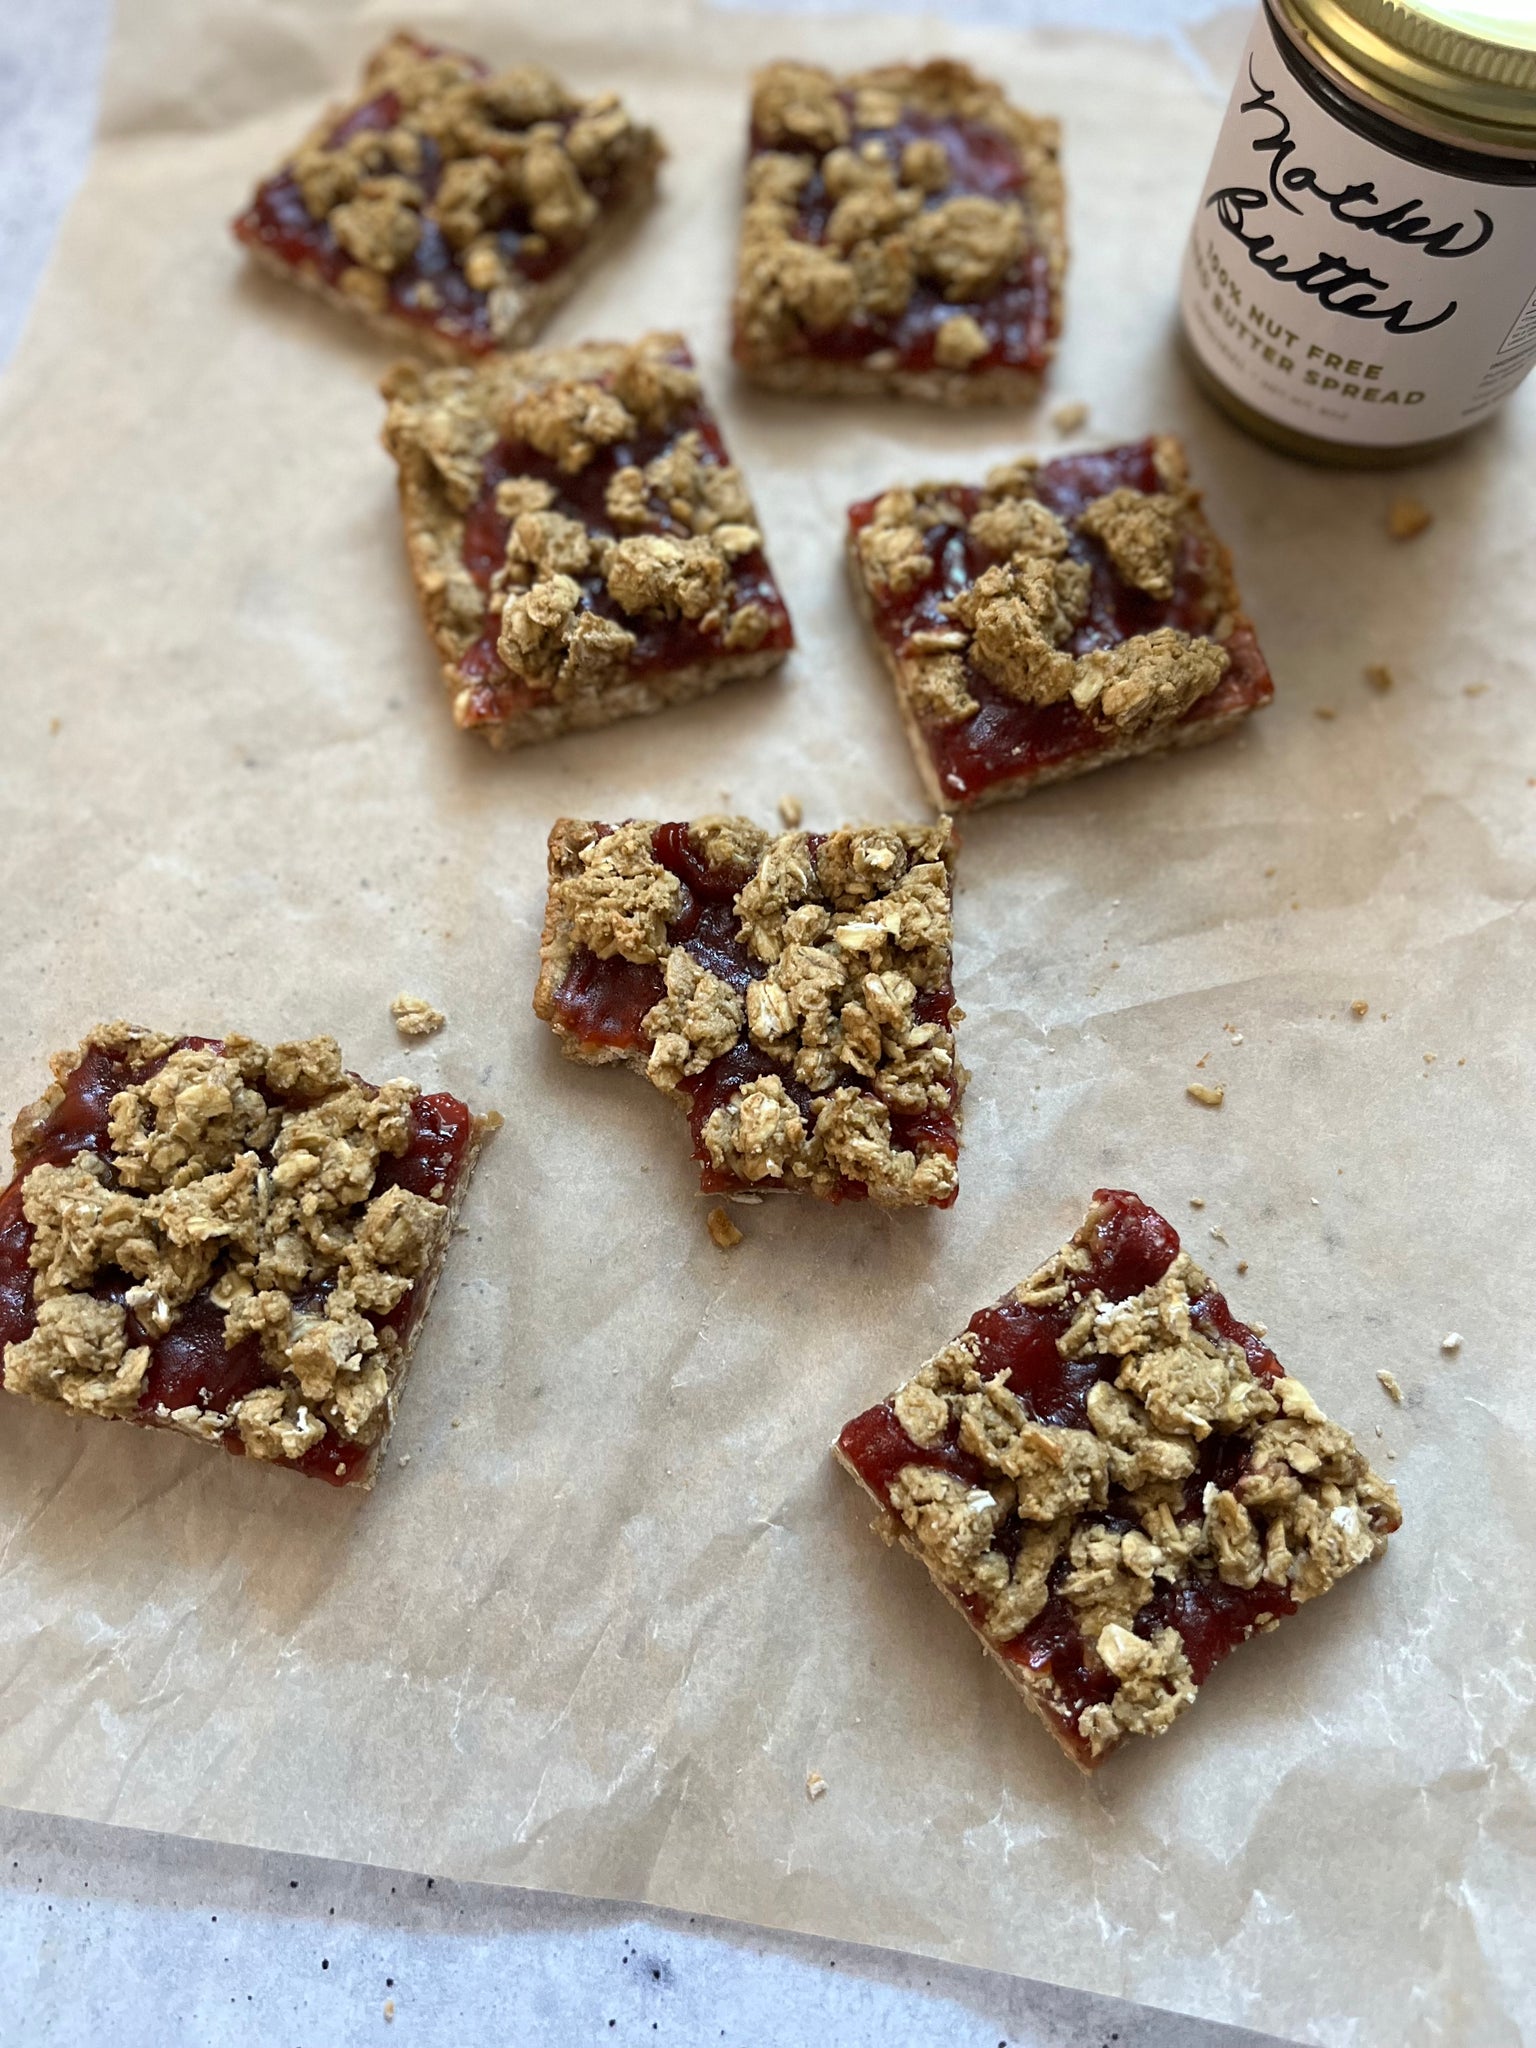 Mother Butter Jam Crumble Bars